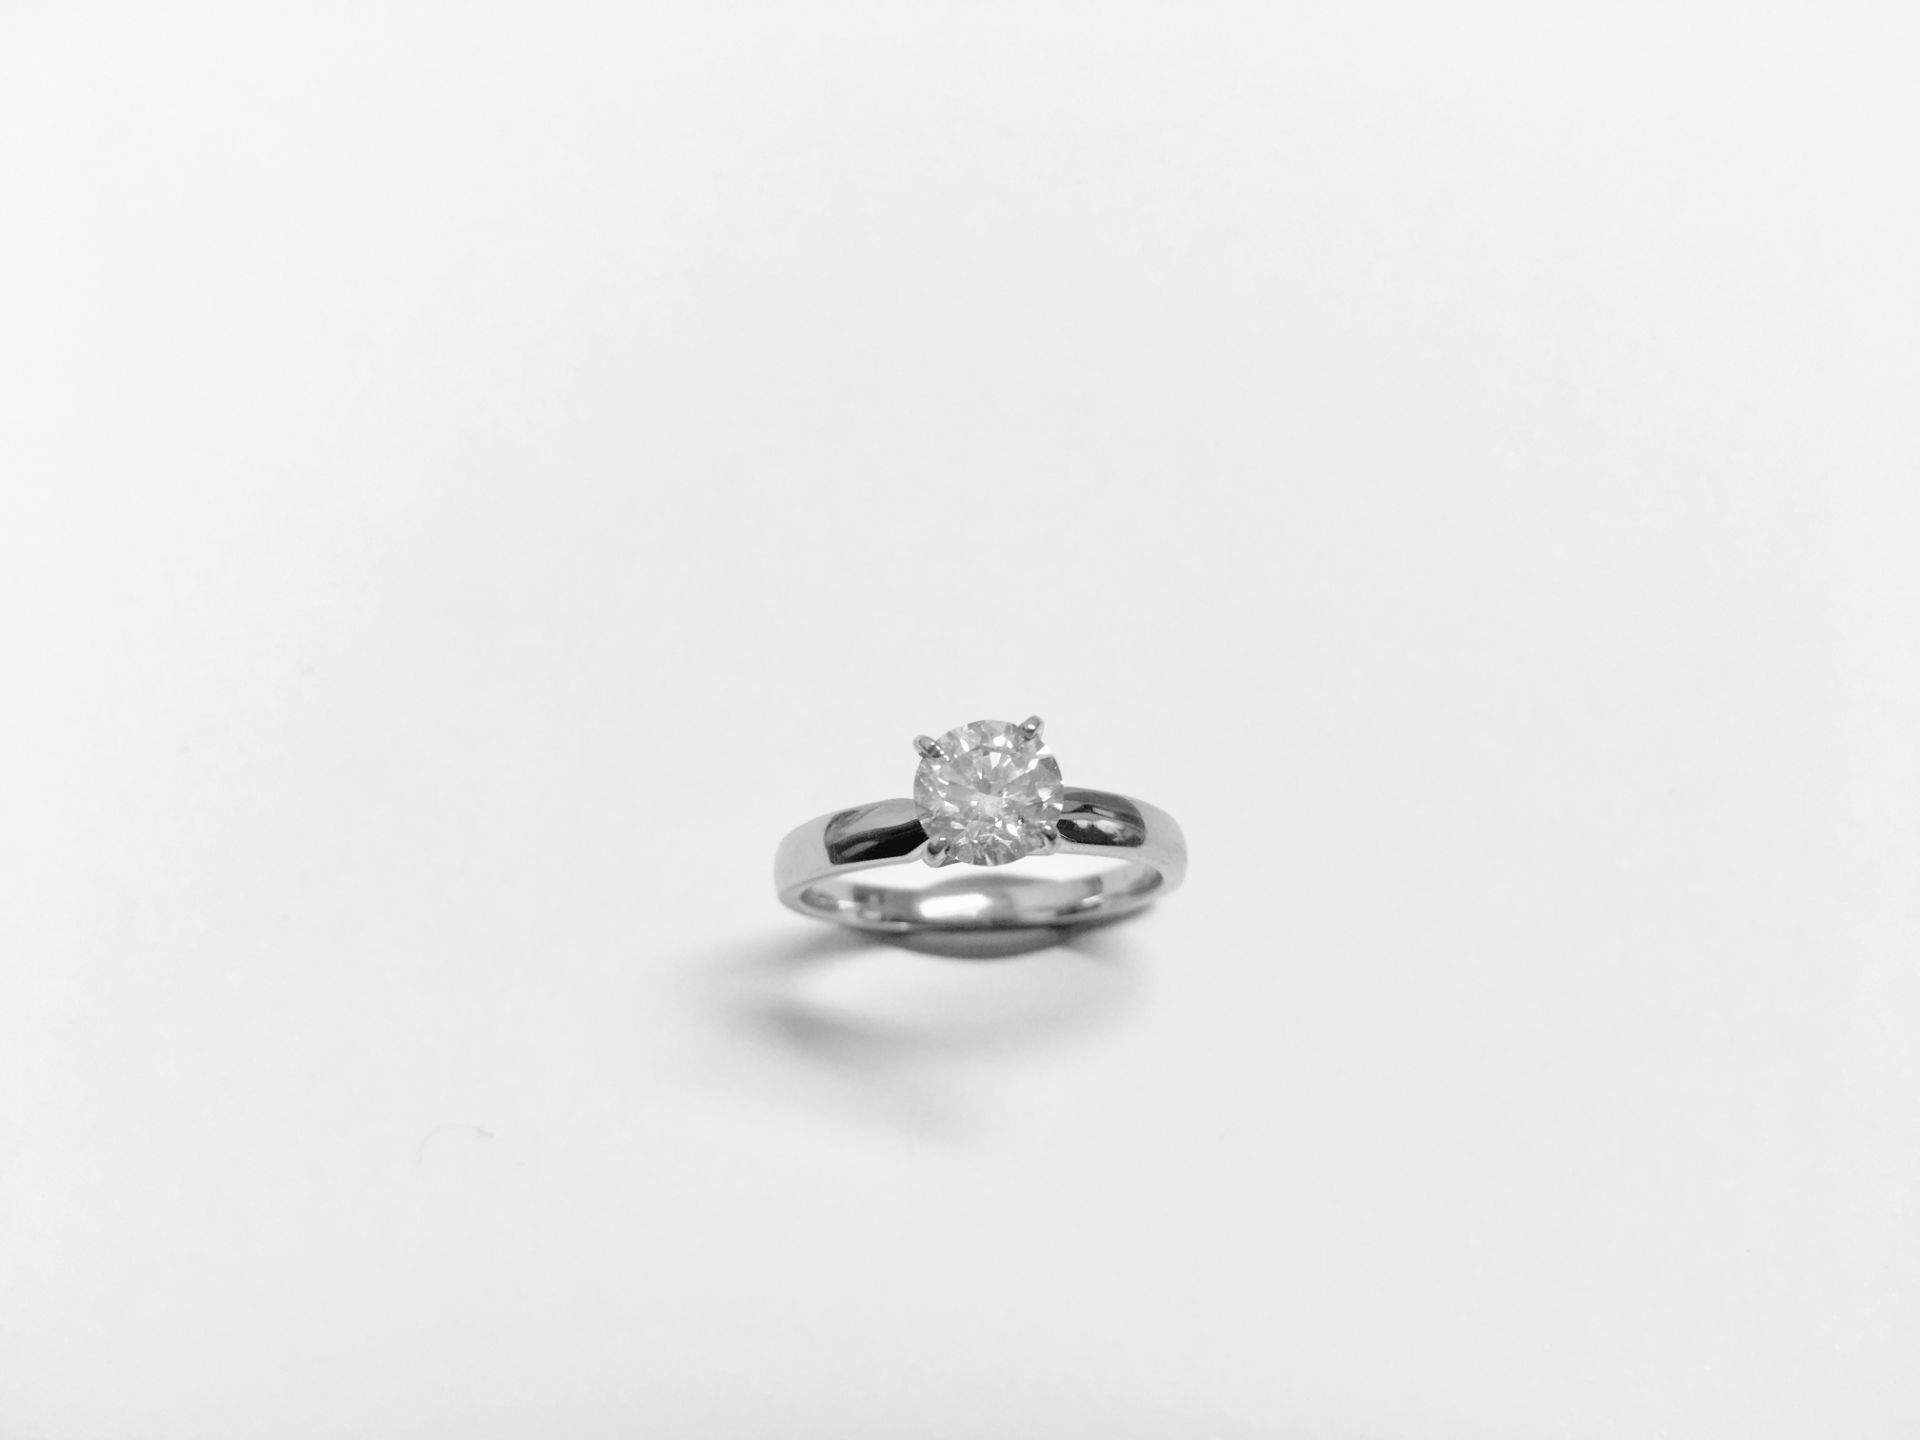 1.15ct diamond solitaire ring set in 18ct white gold. H colour and SI2 clarity. 4 claw setting. - Image 3 of 3